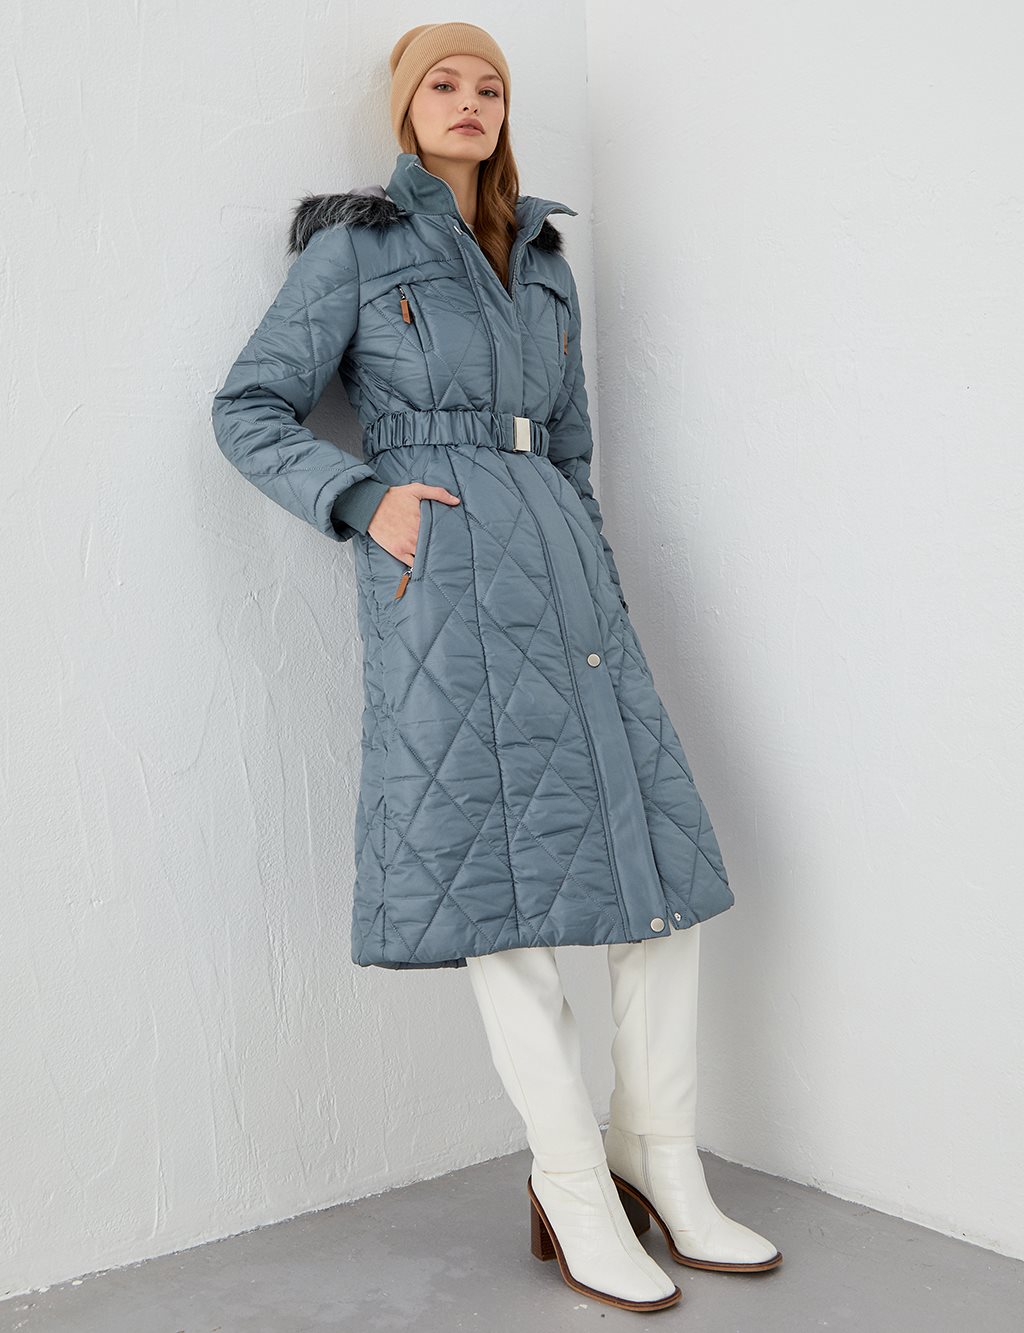 Diamond Patterned Quilted Inflatable Coat Teal